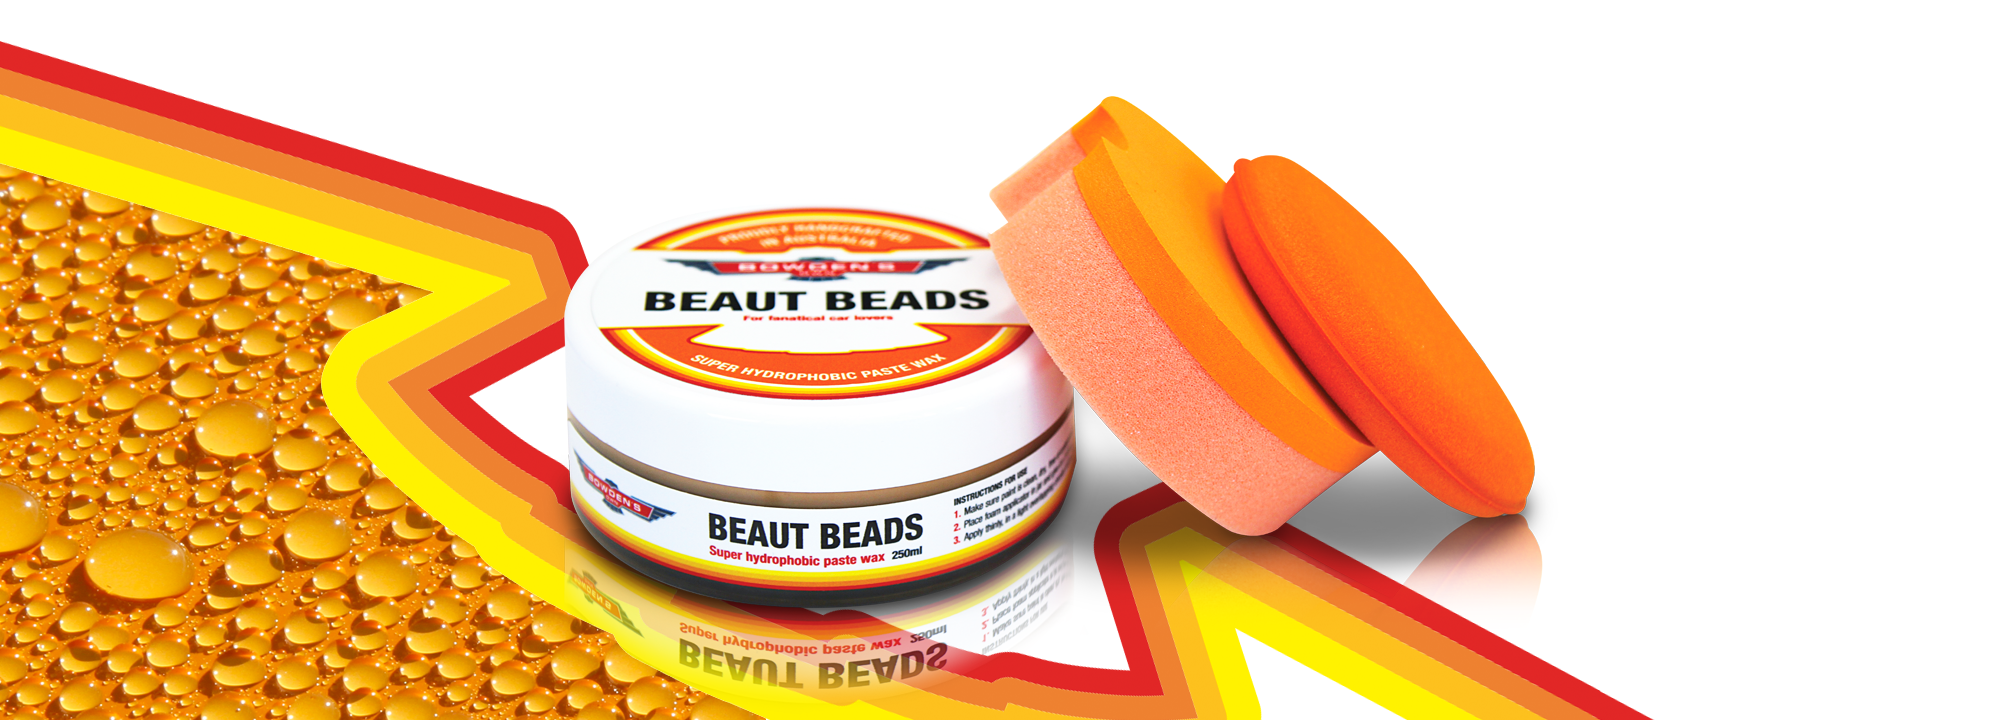 Beaut Beads is Here!